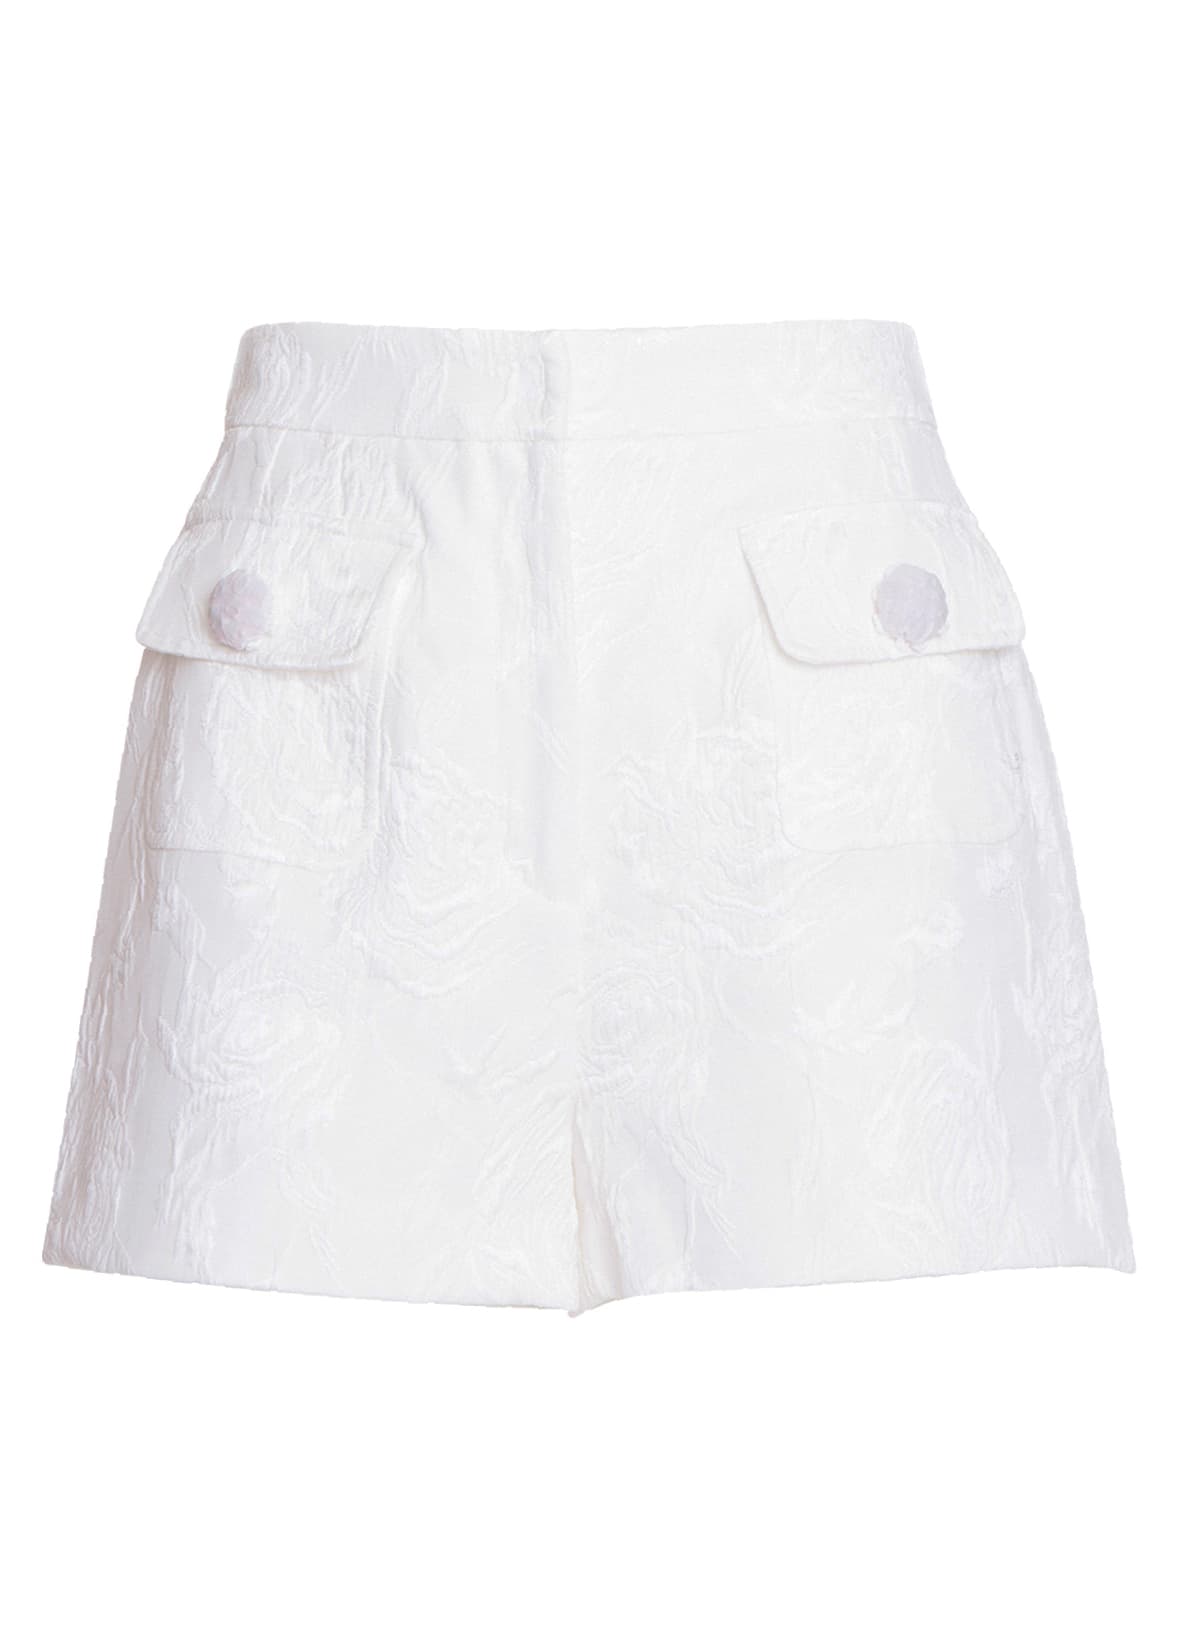 Dolce & Gabbana Brocade Shorts With Buttons In Bianco